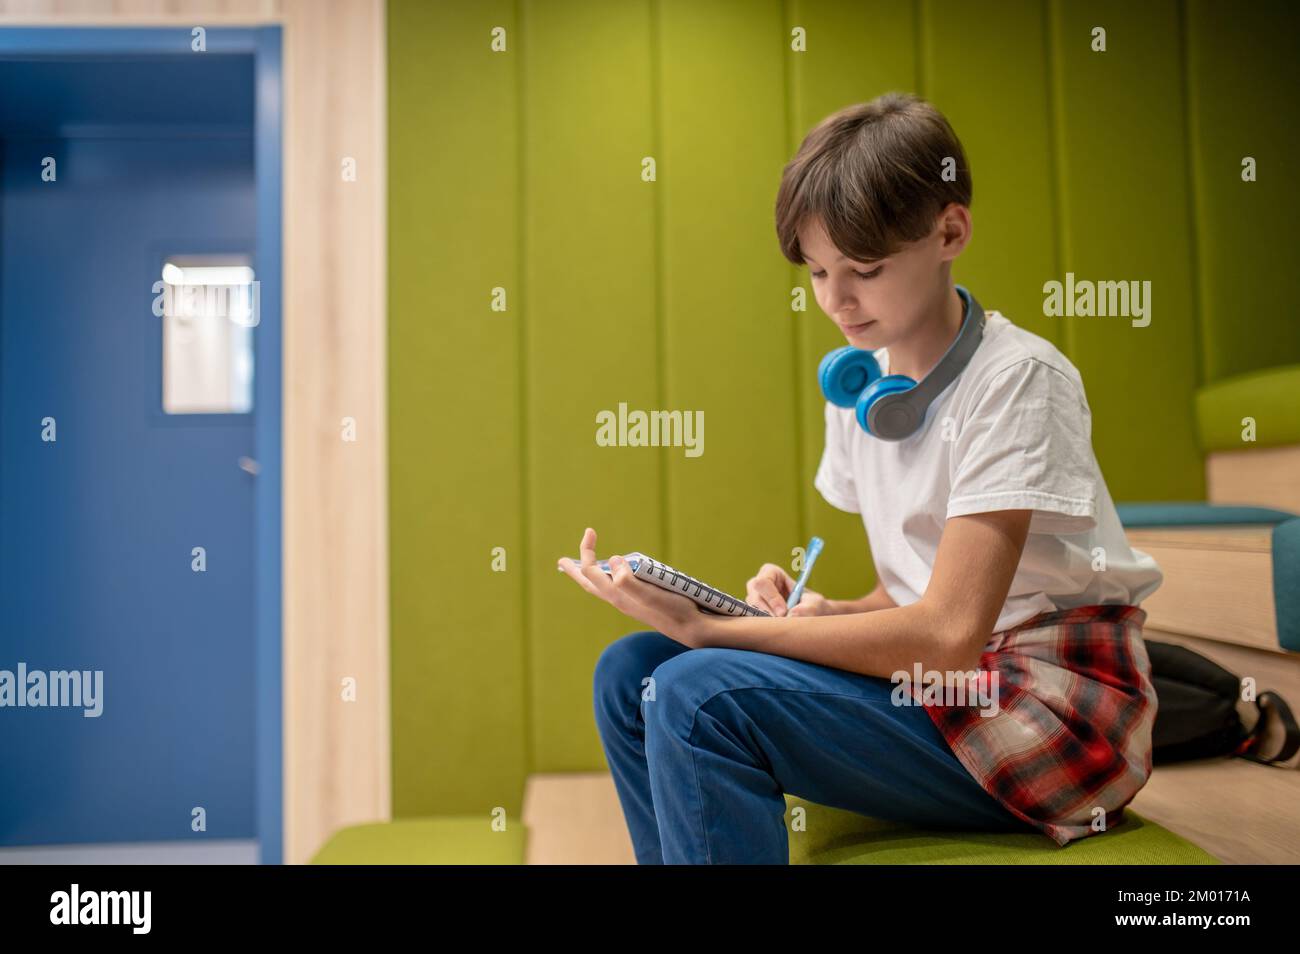 At school. A schoolboy writing something and looking involved. Stock Photo